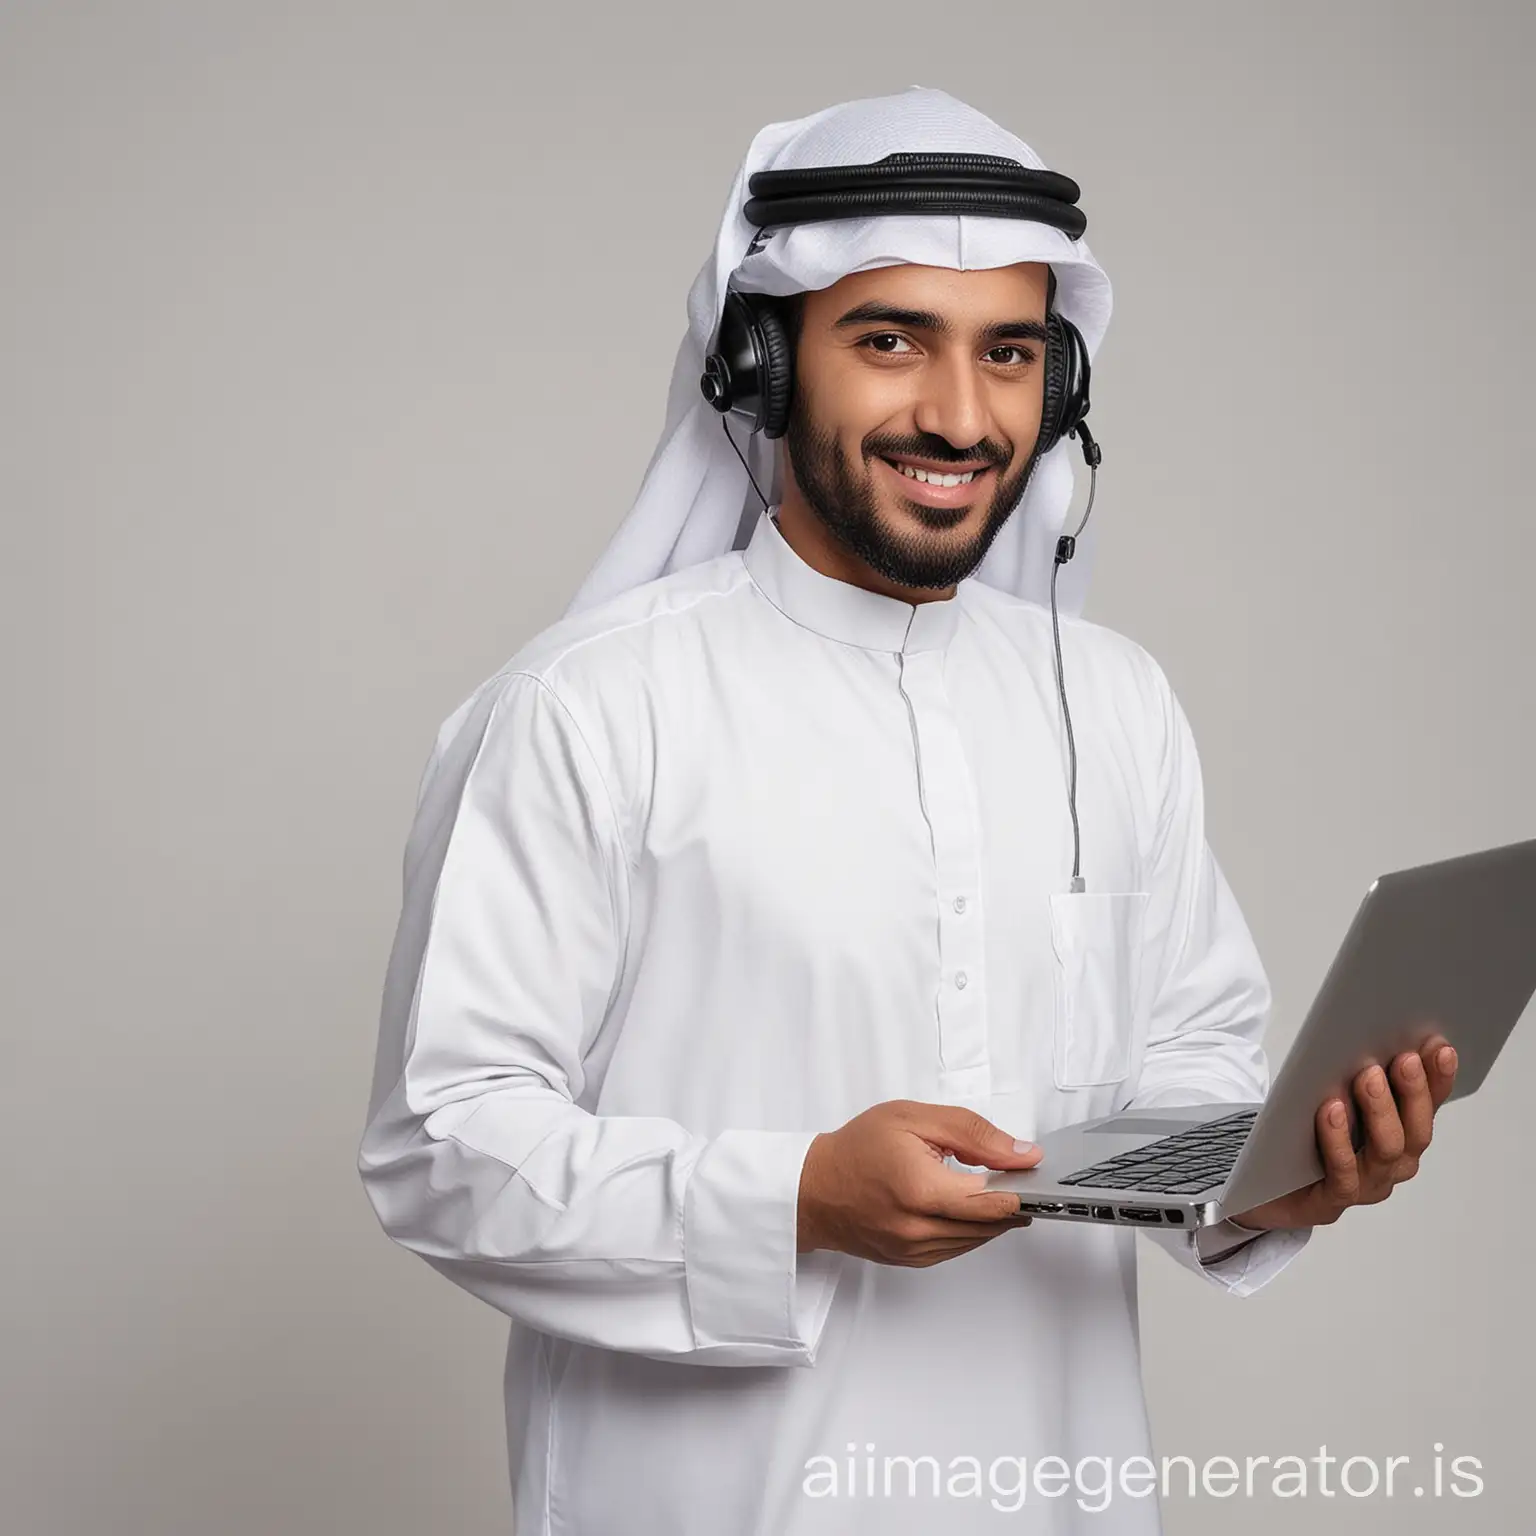 Smiling-Kuwaiti-Customer-Service-Representative-with-Laptop-and-Oqal-Headset